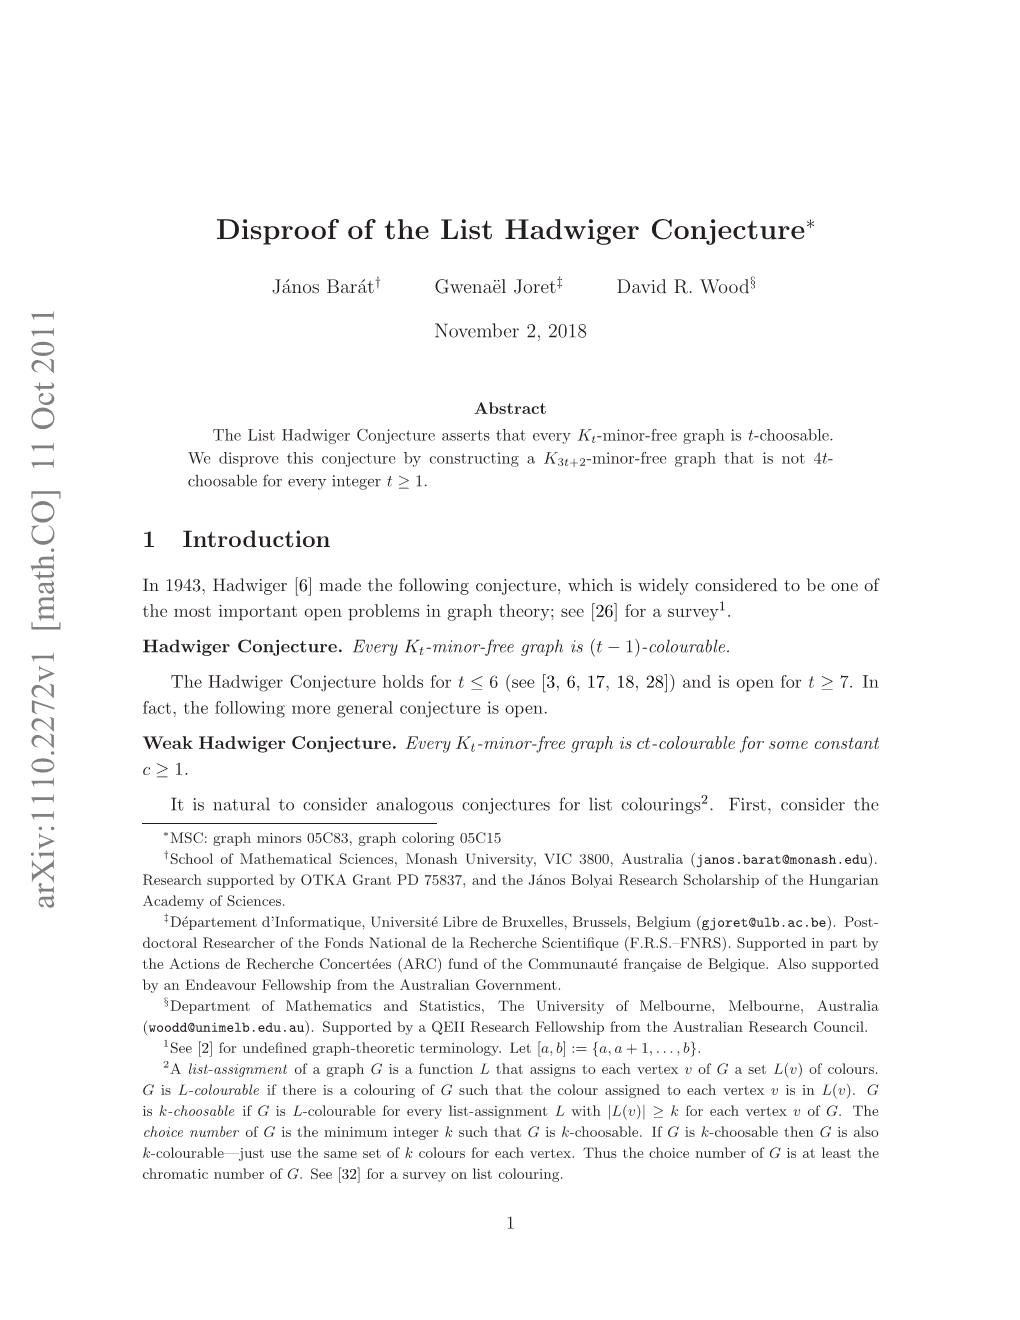 Disproof of the List Hadwiger Conjecture